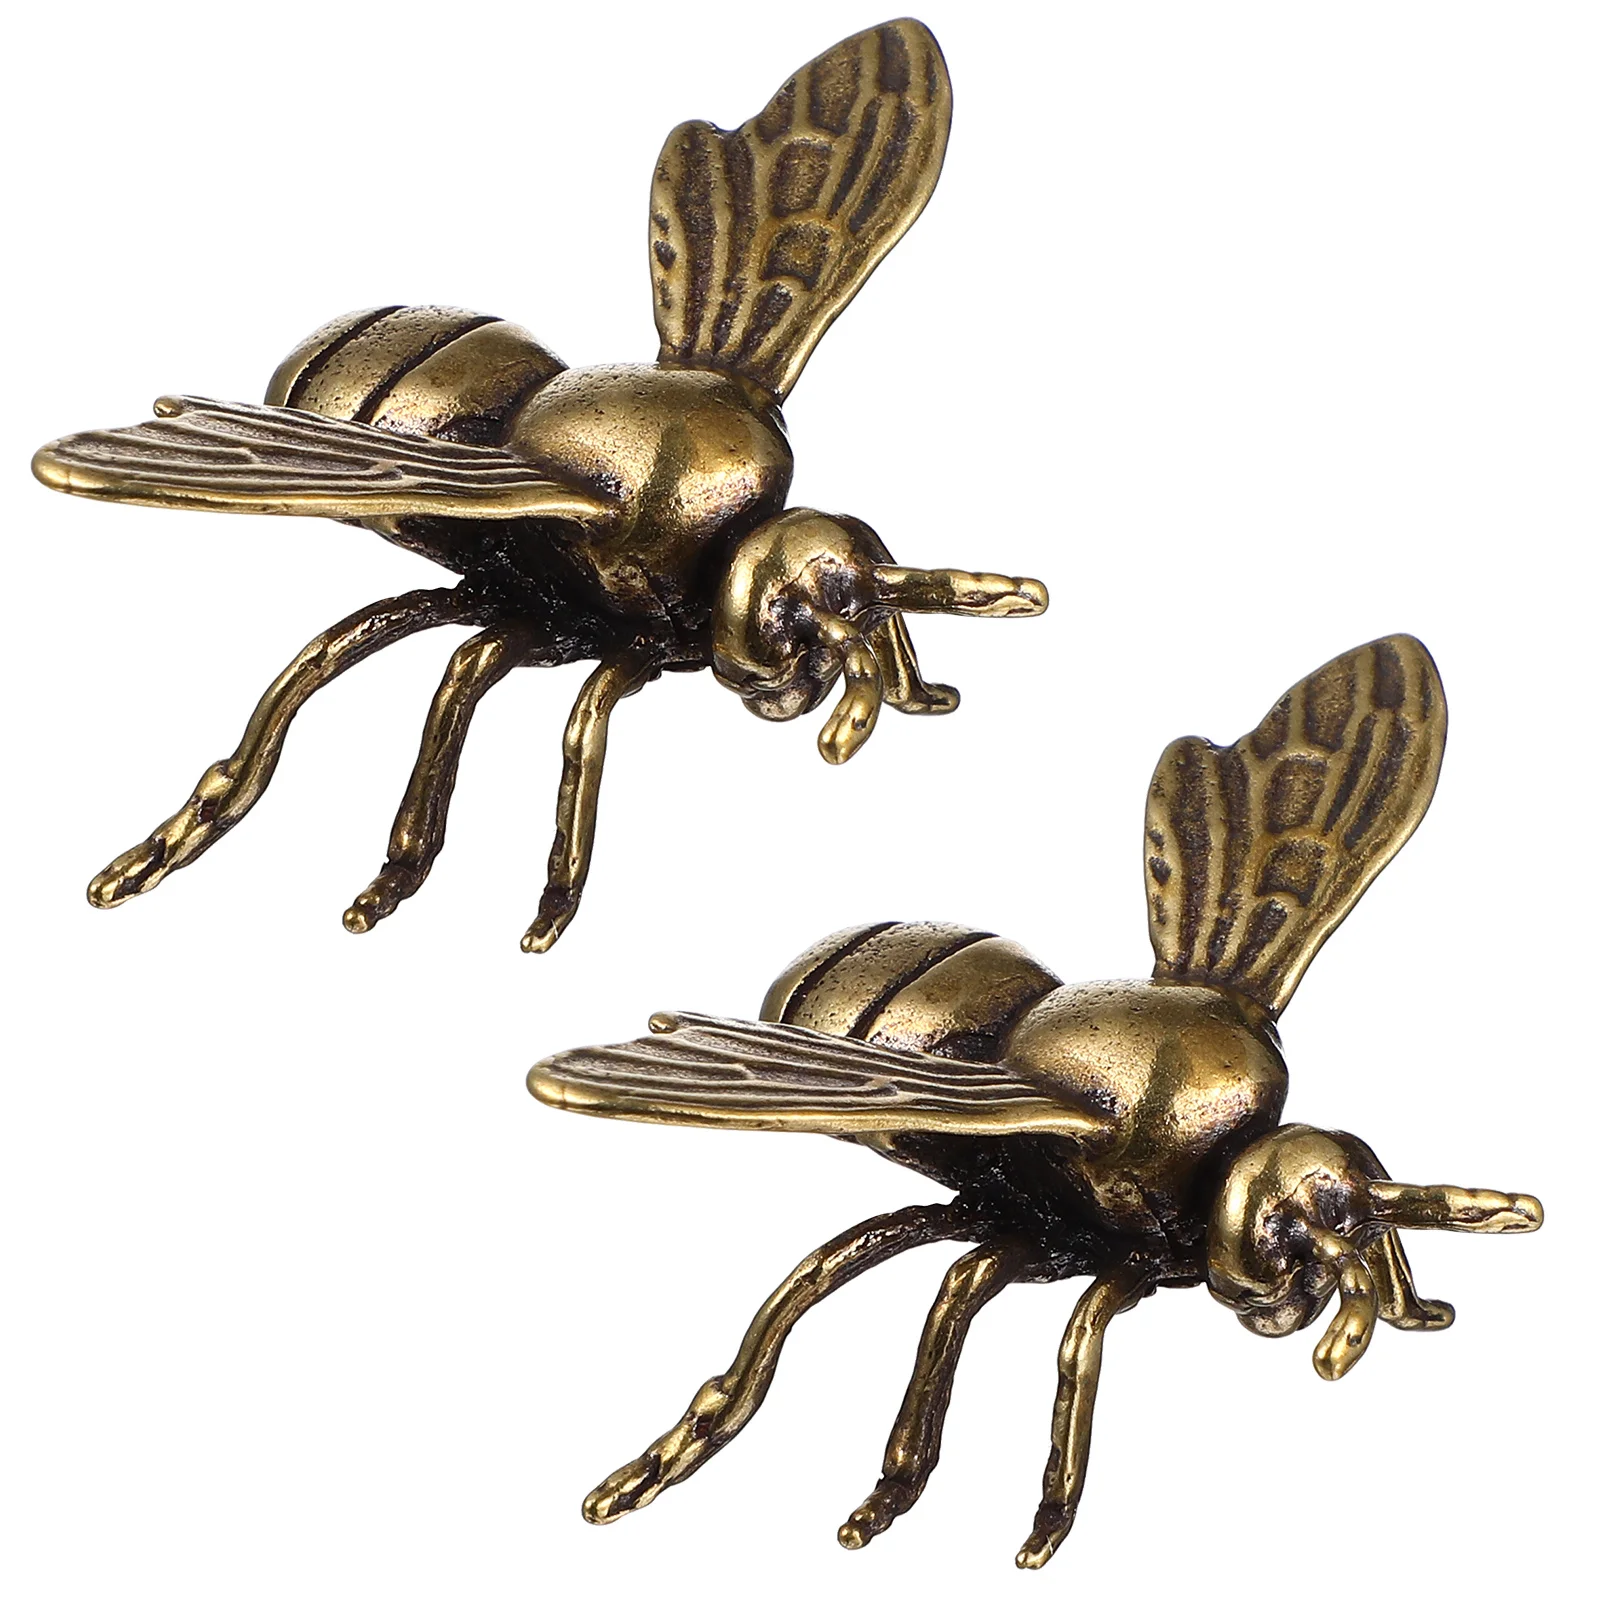 

Bee Handmade Pure Copper Antique Bronze Ware Study Office Decoration Handicrafts Collectible Ornaments Gifts Decor Home